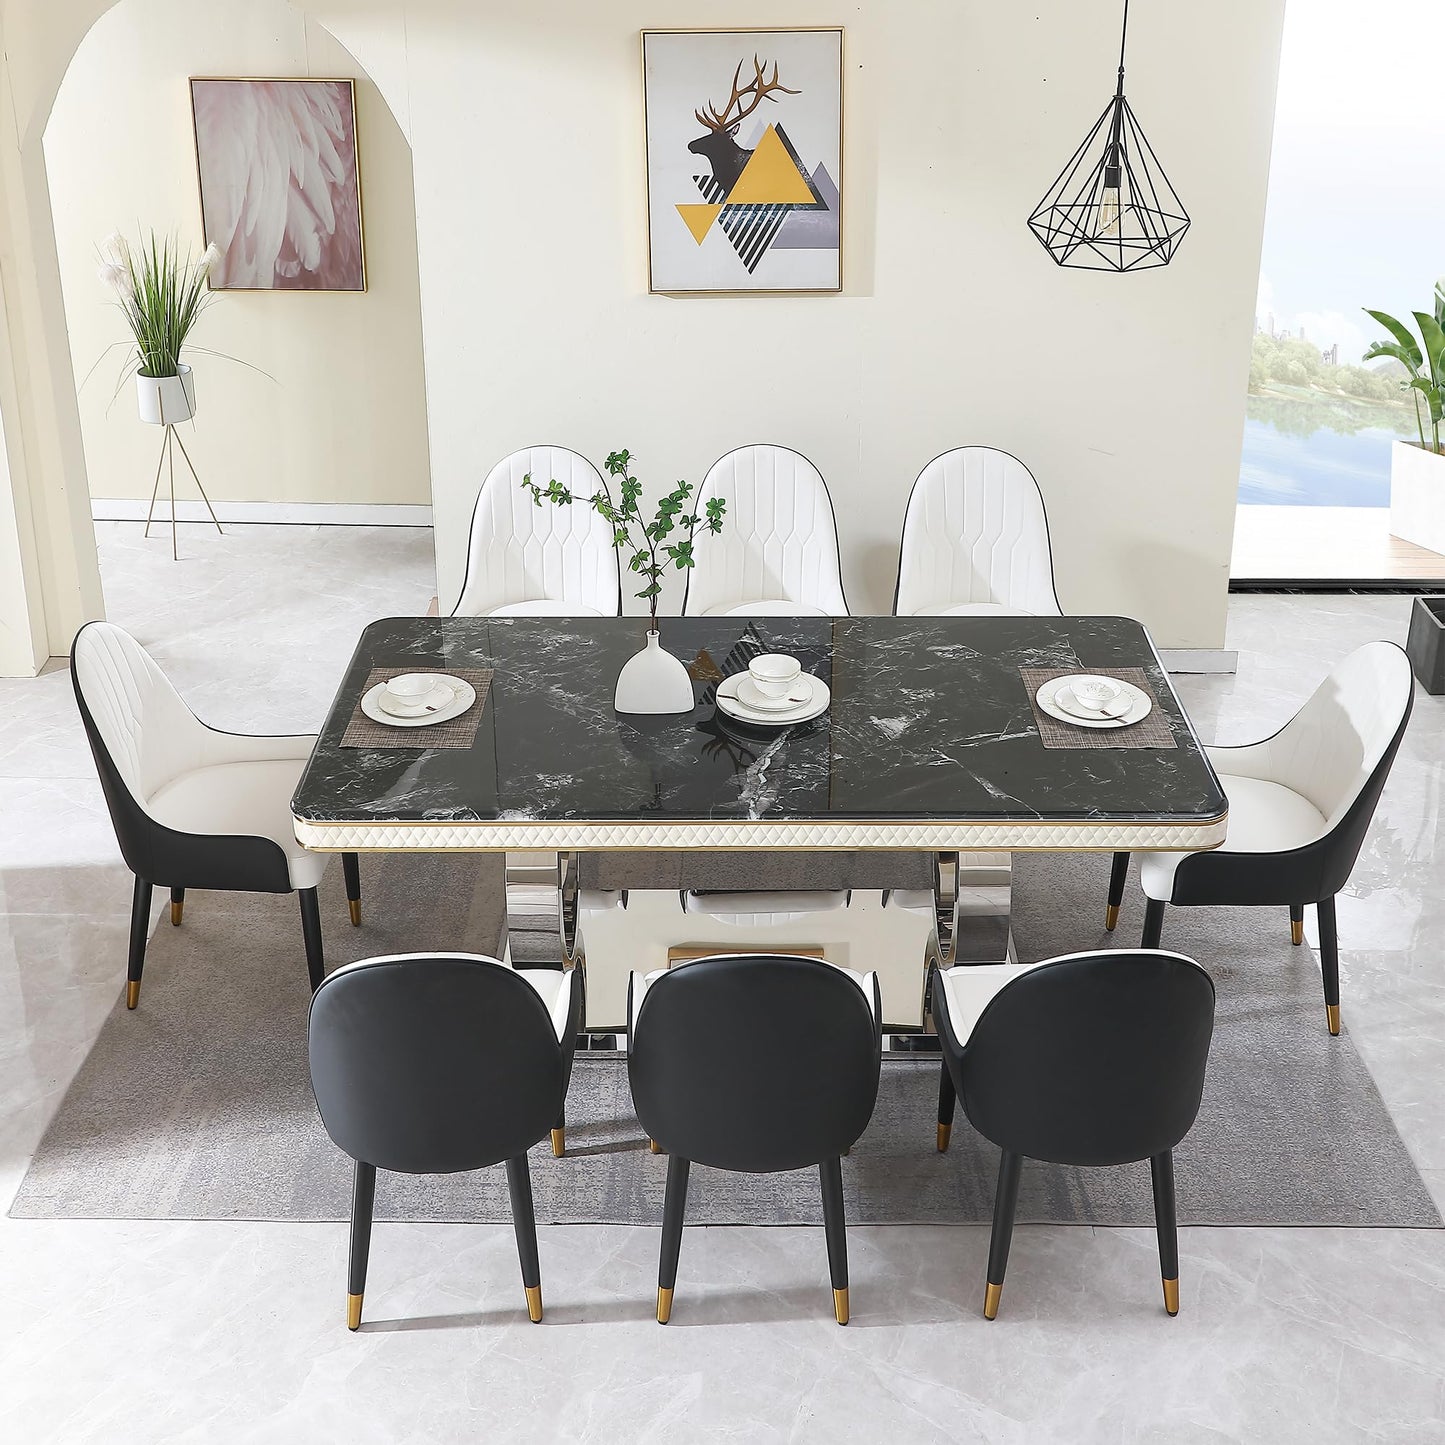 Montary 9 Piece Dining Table Set, Contemporary Modern Dining Table Set of 8, Includes 79" Rectangular Marble Dining Table, 8 Black and White Dining Chairs for Home, Kitchen, Dining Room